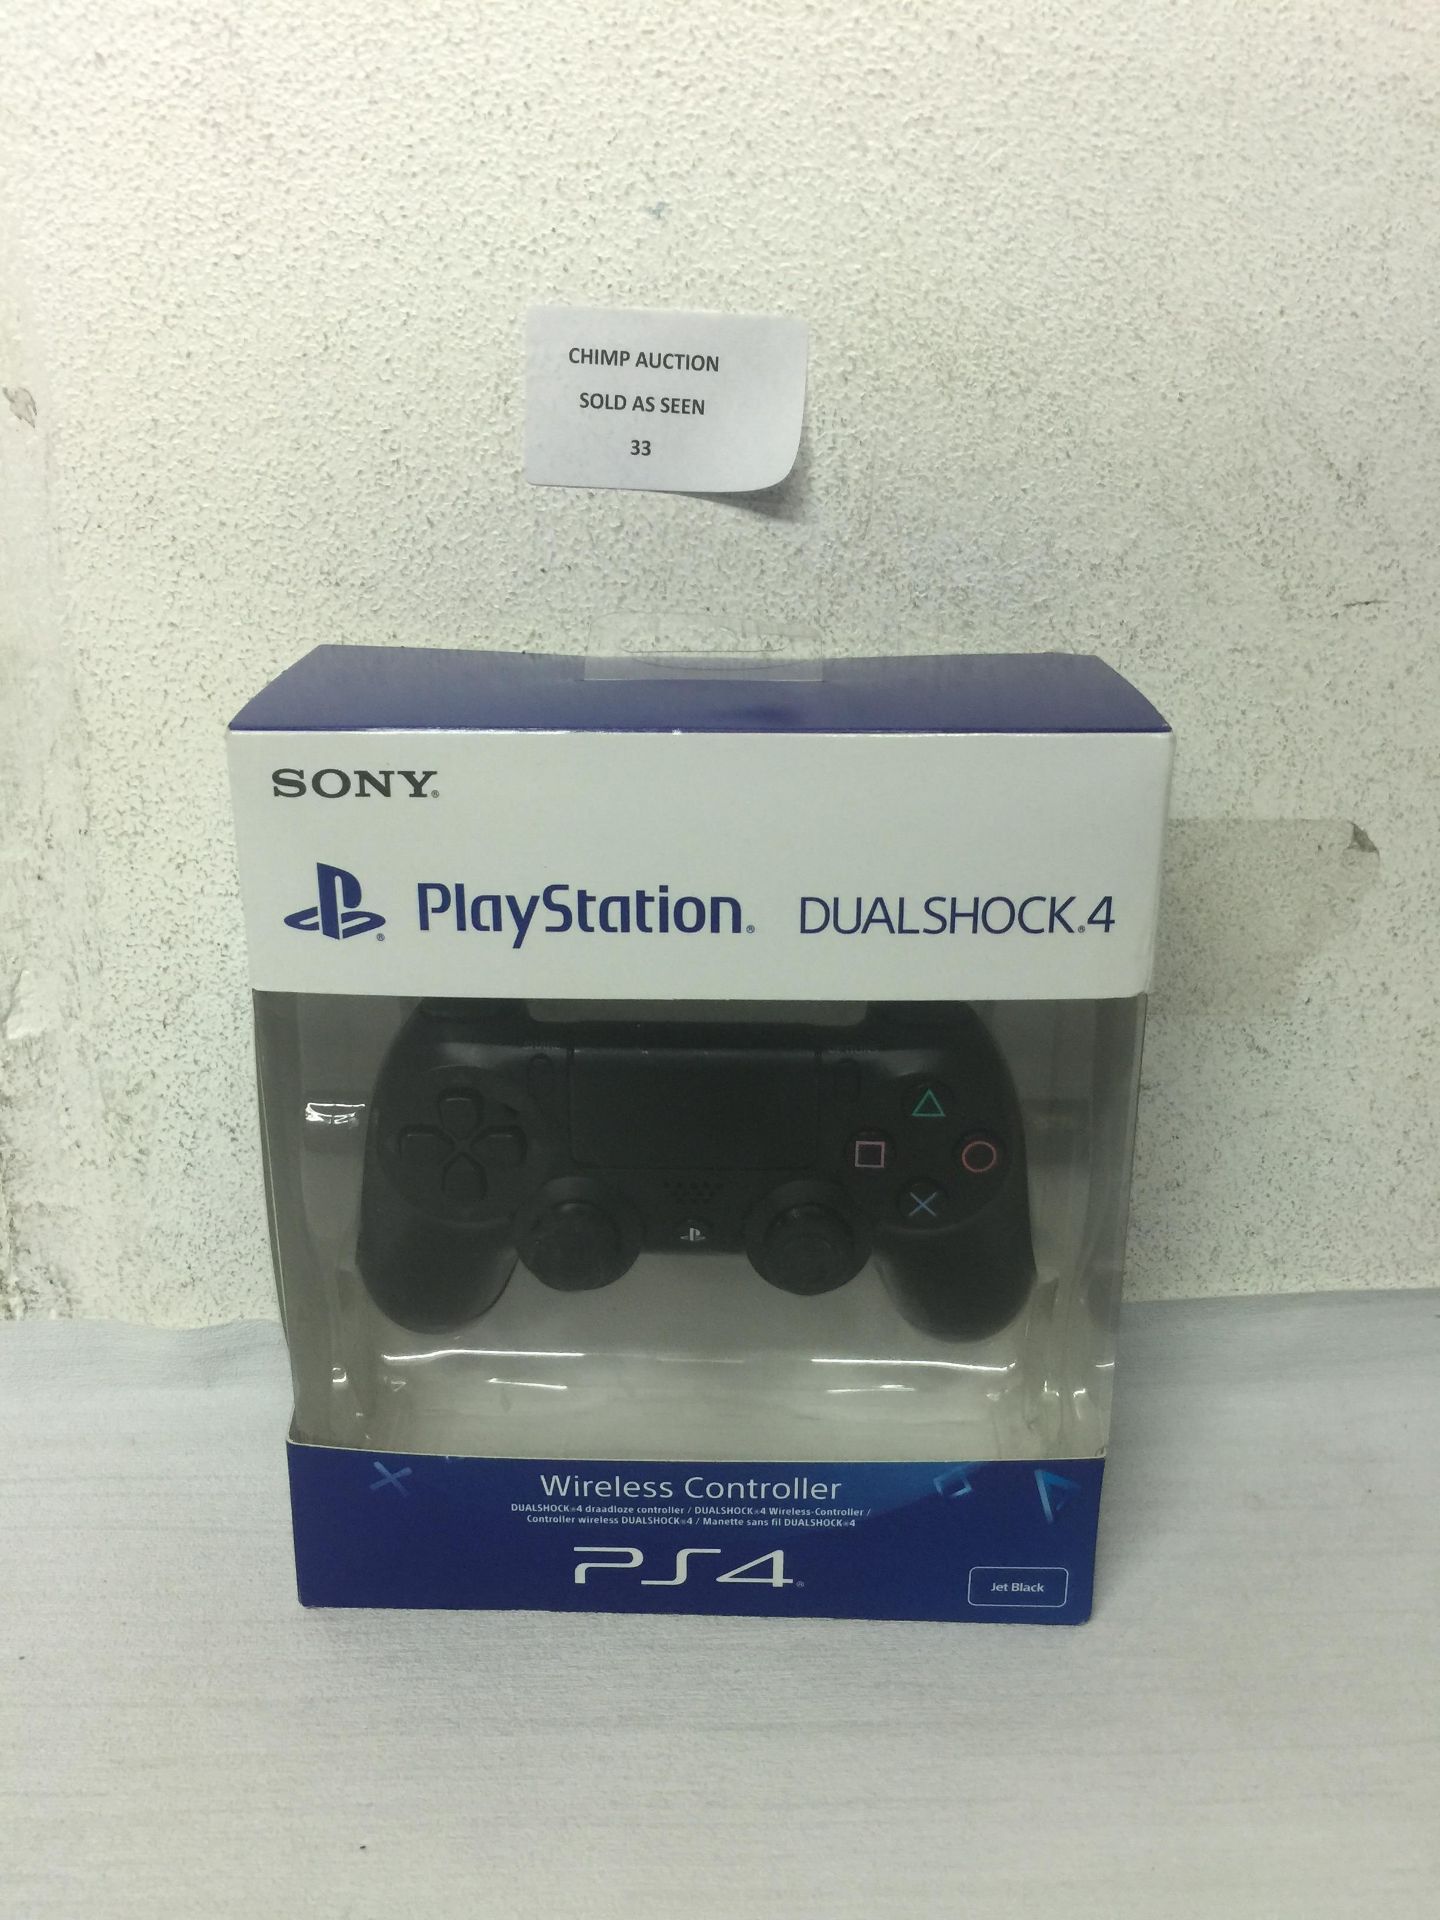 Sony PlayStation DualShock 4 WIRELESS PS4 CONTROLLER